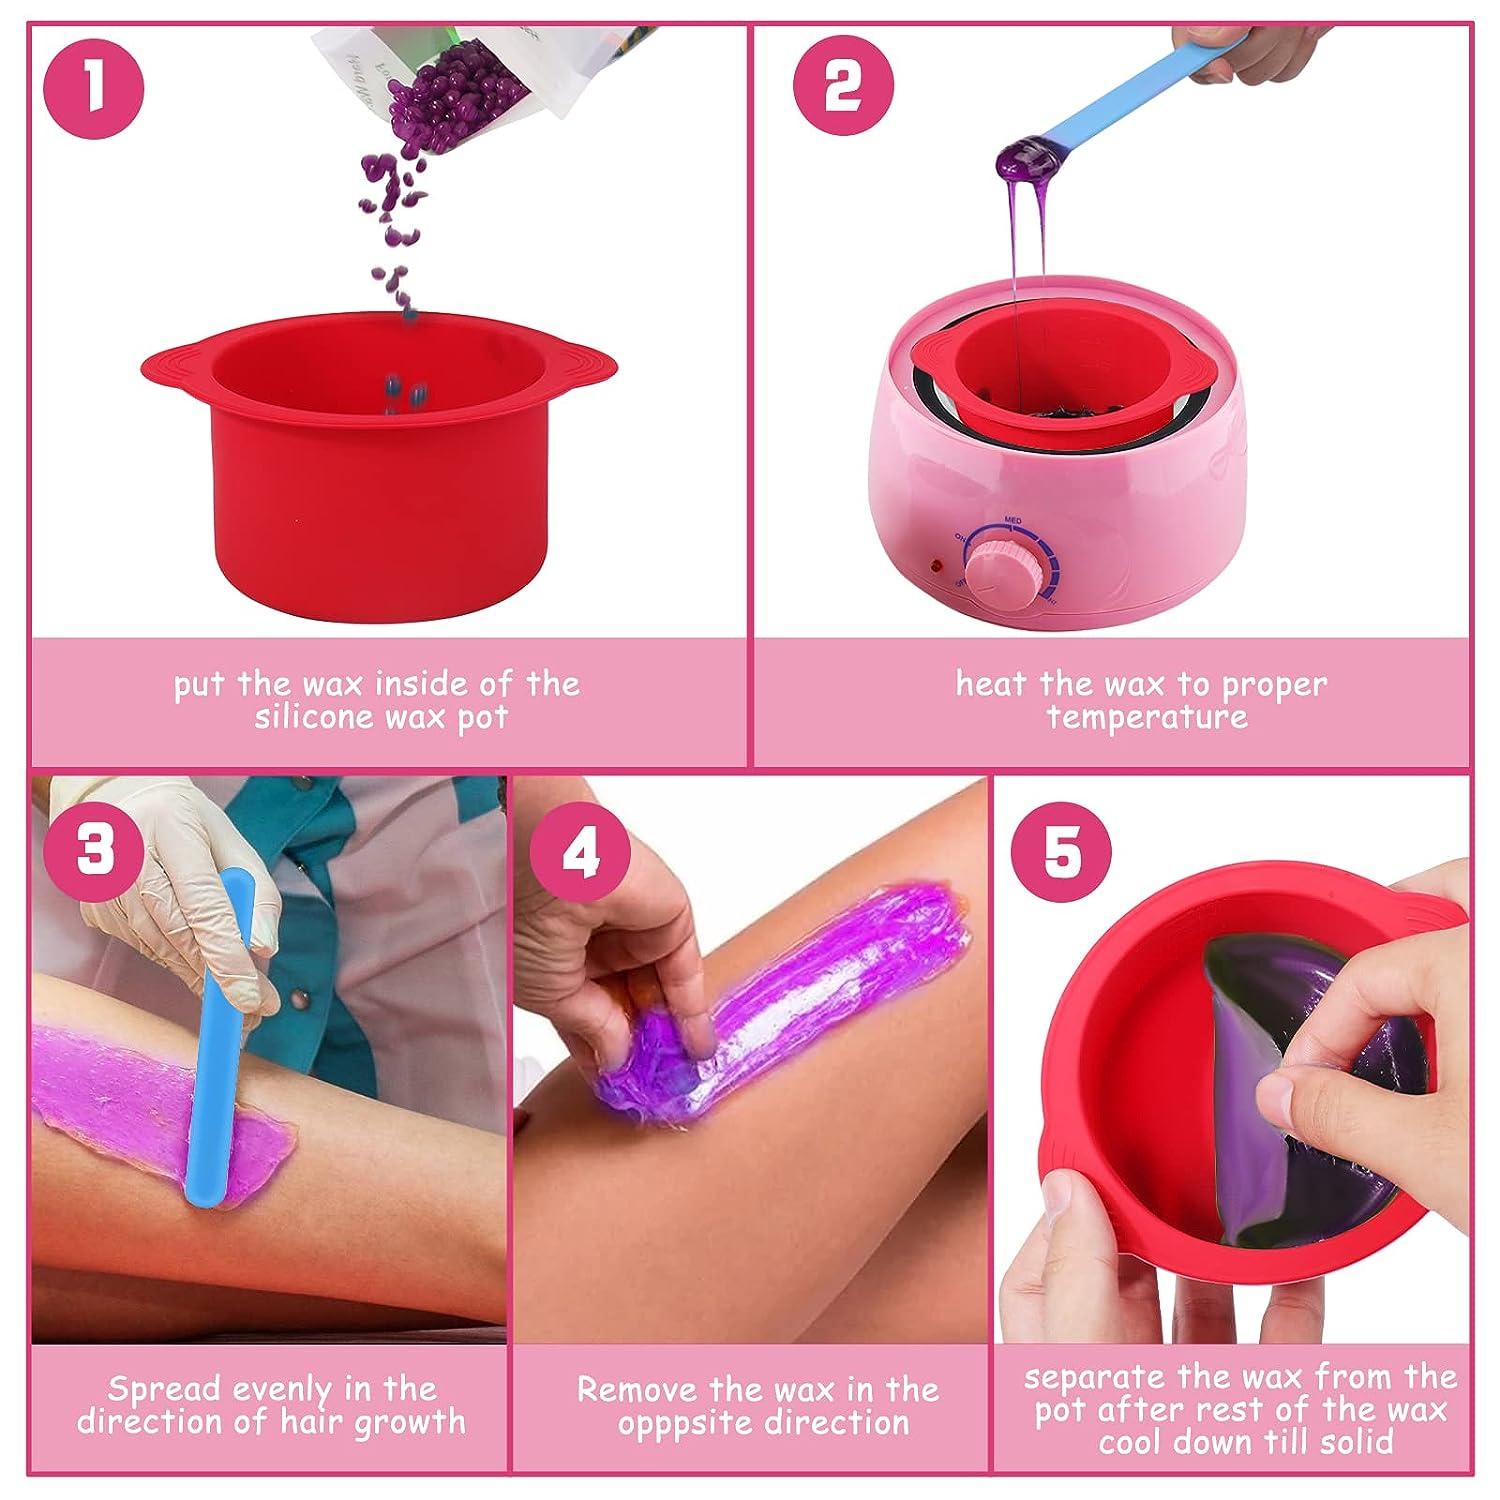 Our new silicone wax pot liners are SO easy to use! 😍 #waxpot #waxwar